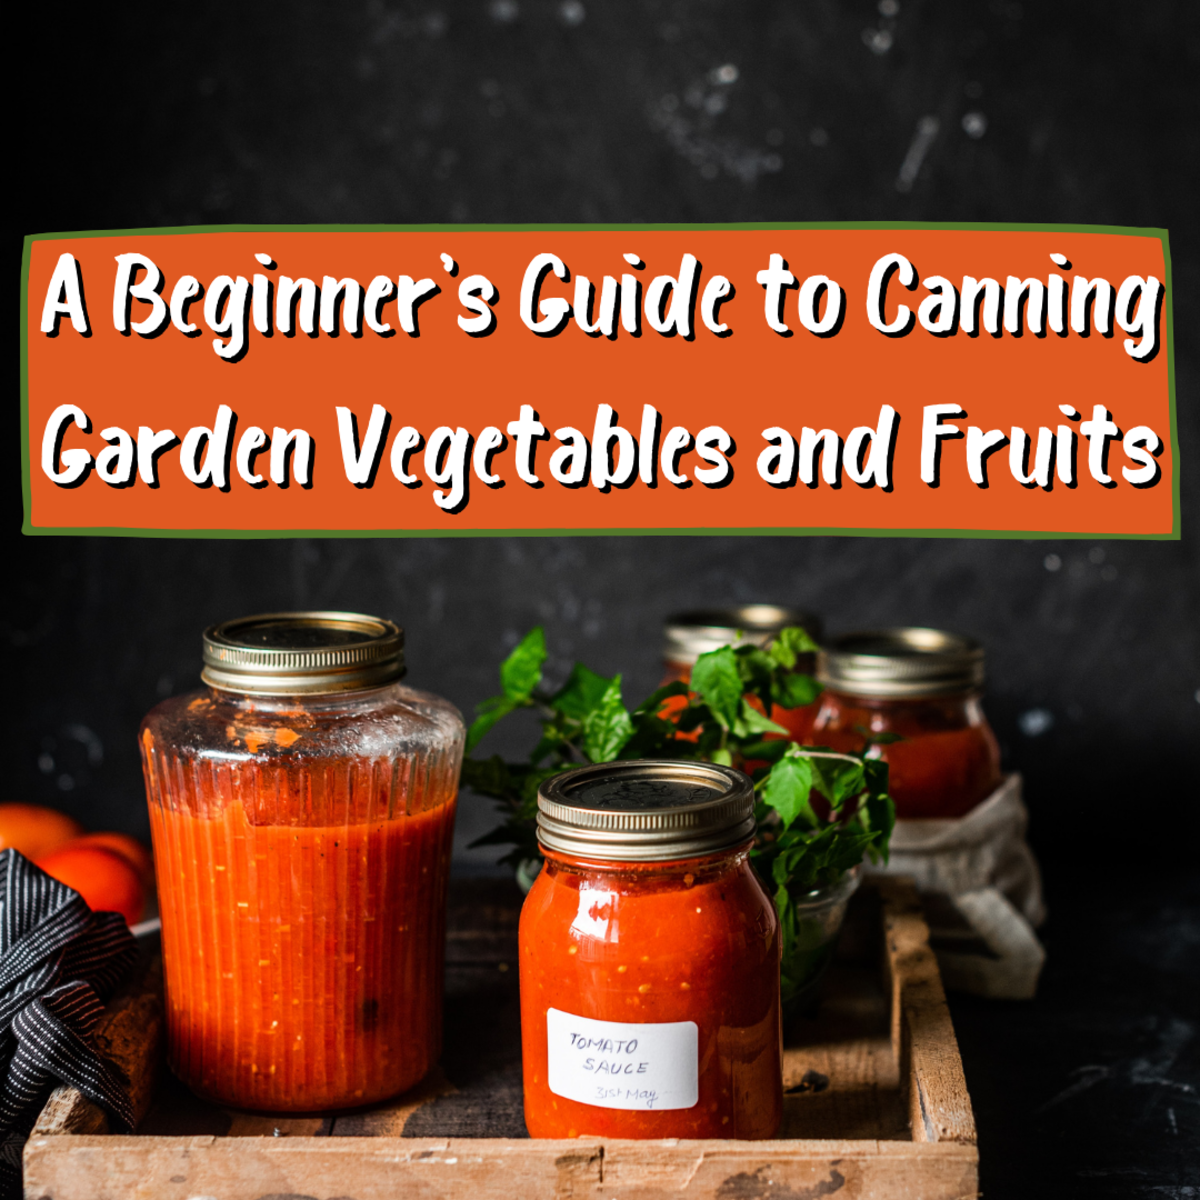 A Beginner's Guide to Canning Garden Vegetables and Fruits